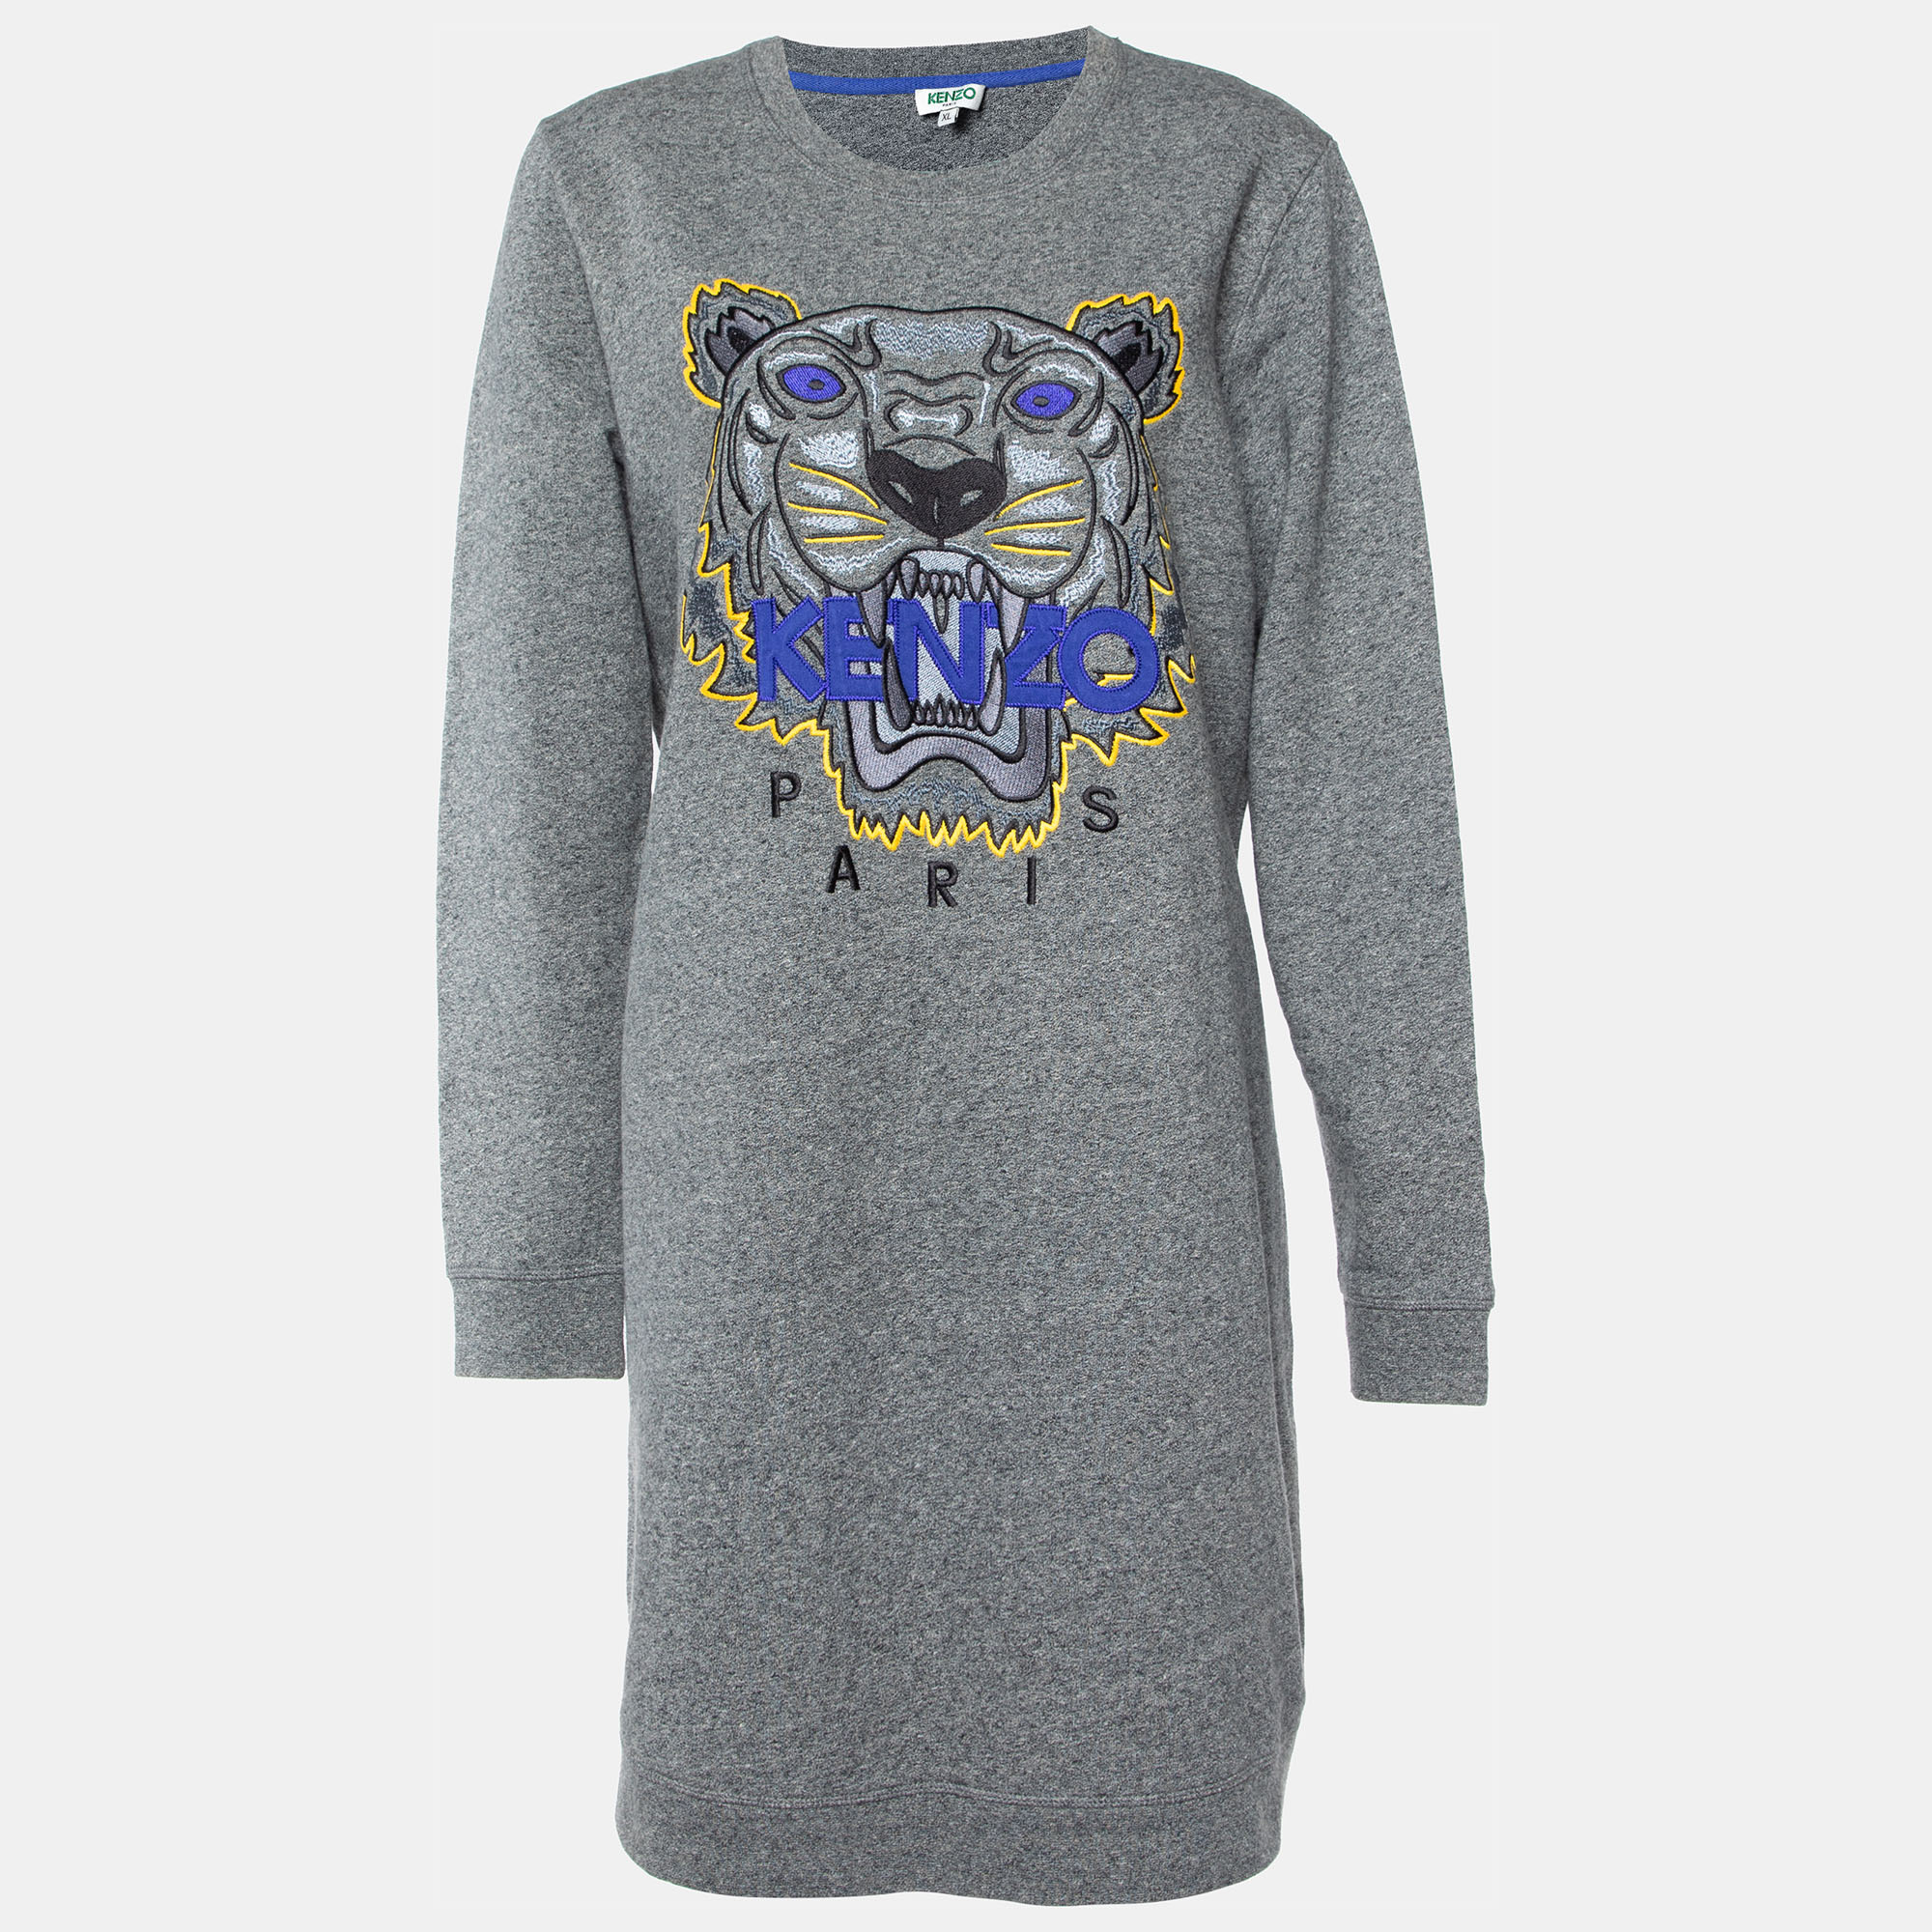 Kenzo Grey Tiger Embroidered Cotton Sweater Dress XL